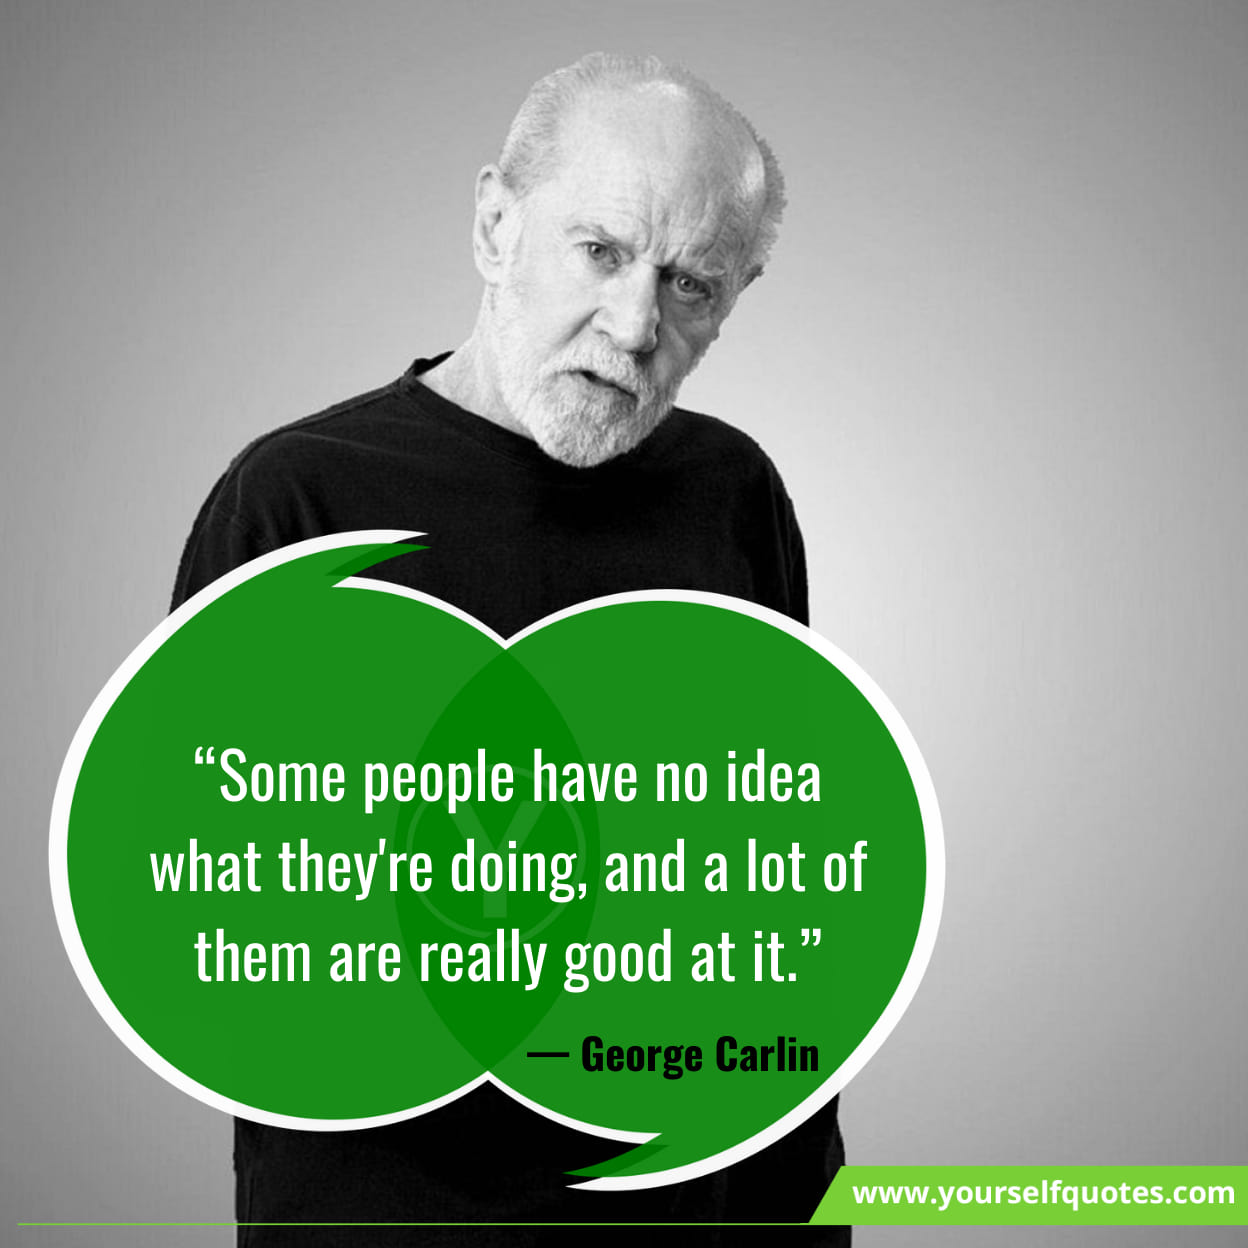 George Carlin Quotes For Success